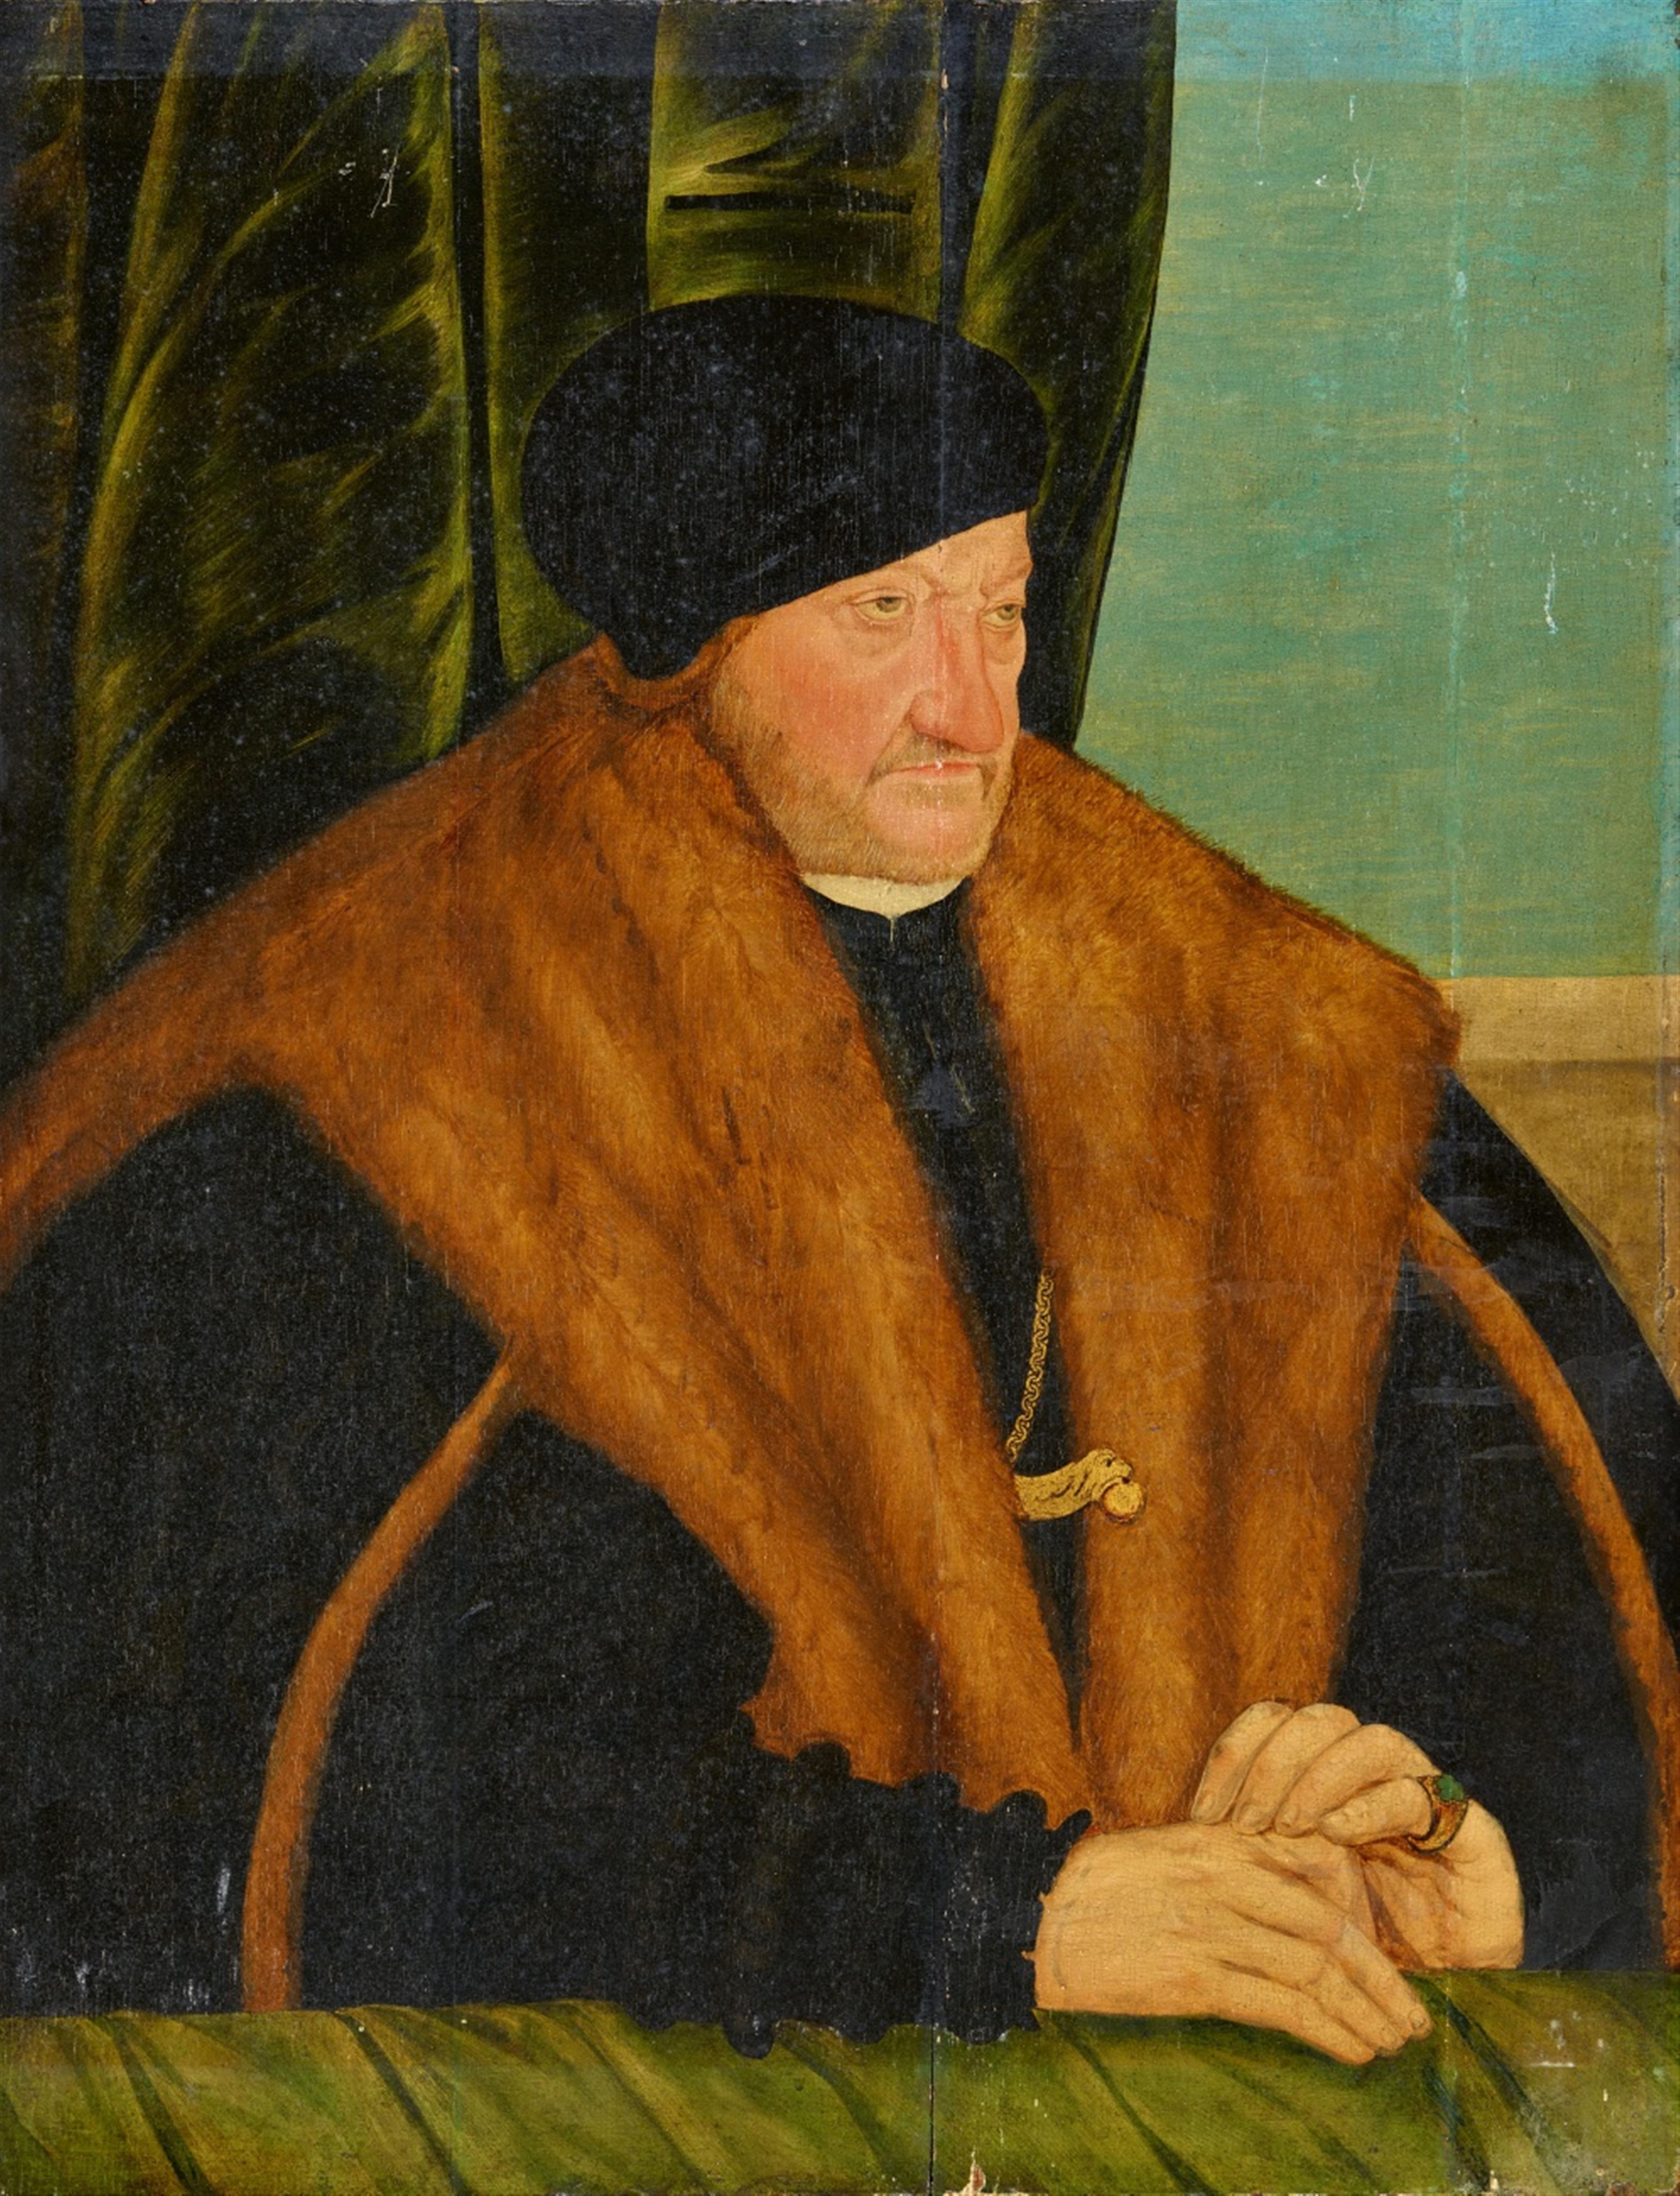 Hans Krell, attributed to - Prince Elector August of Saxony (1526-1586) - image-1